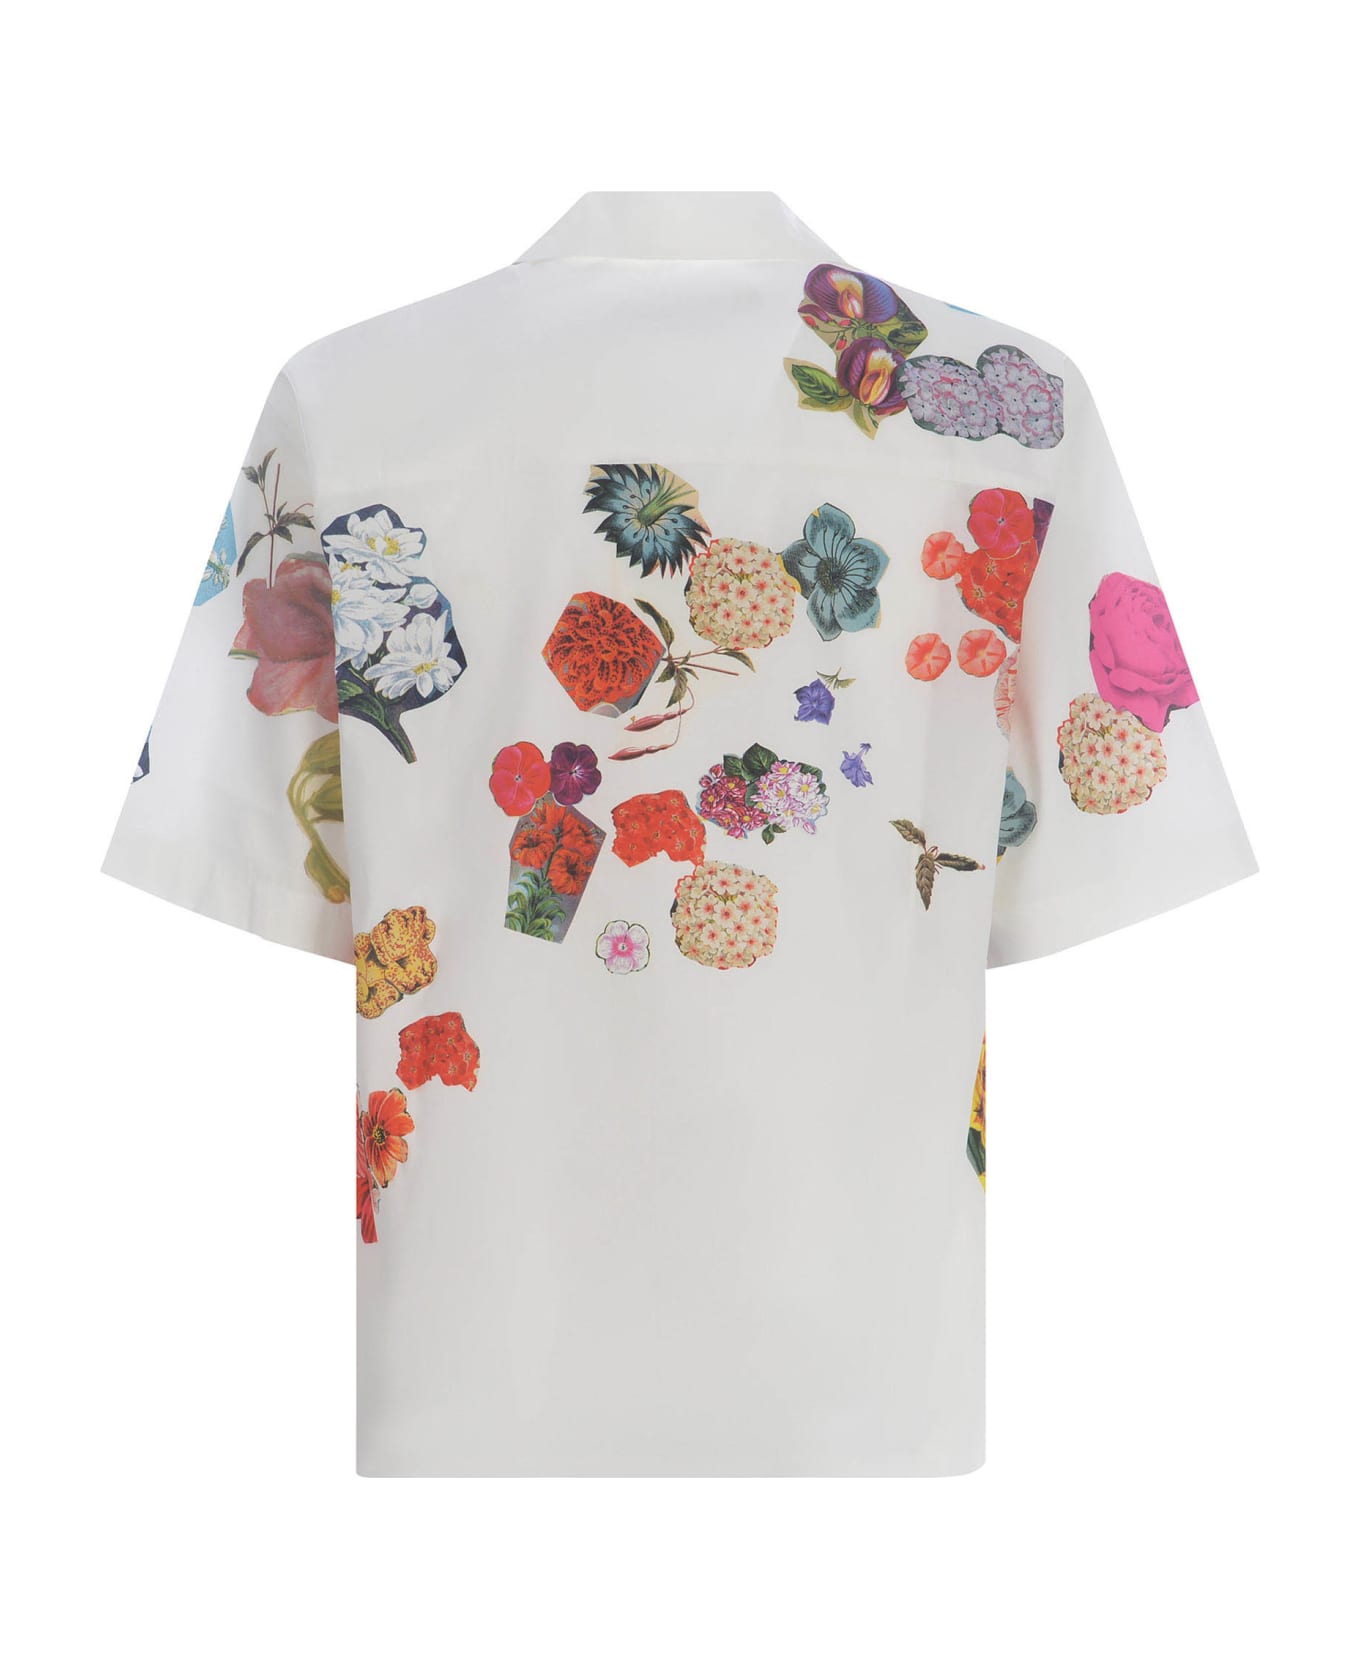 Marni 'flowers Collage' Shirt - Lily White